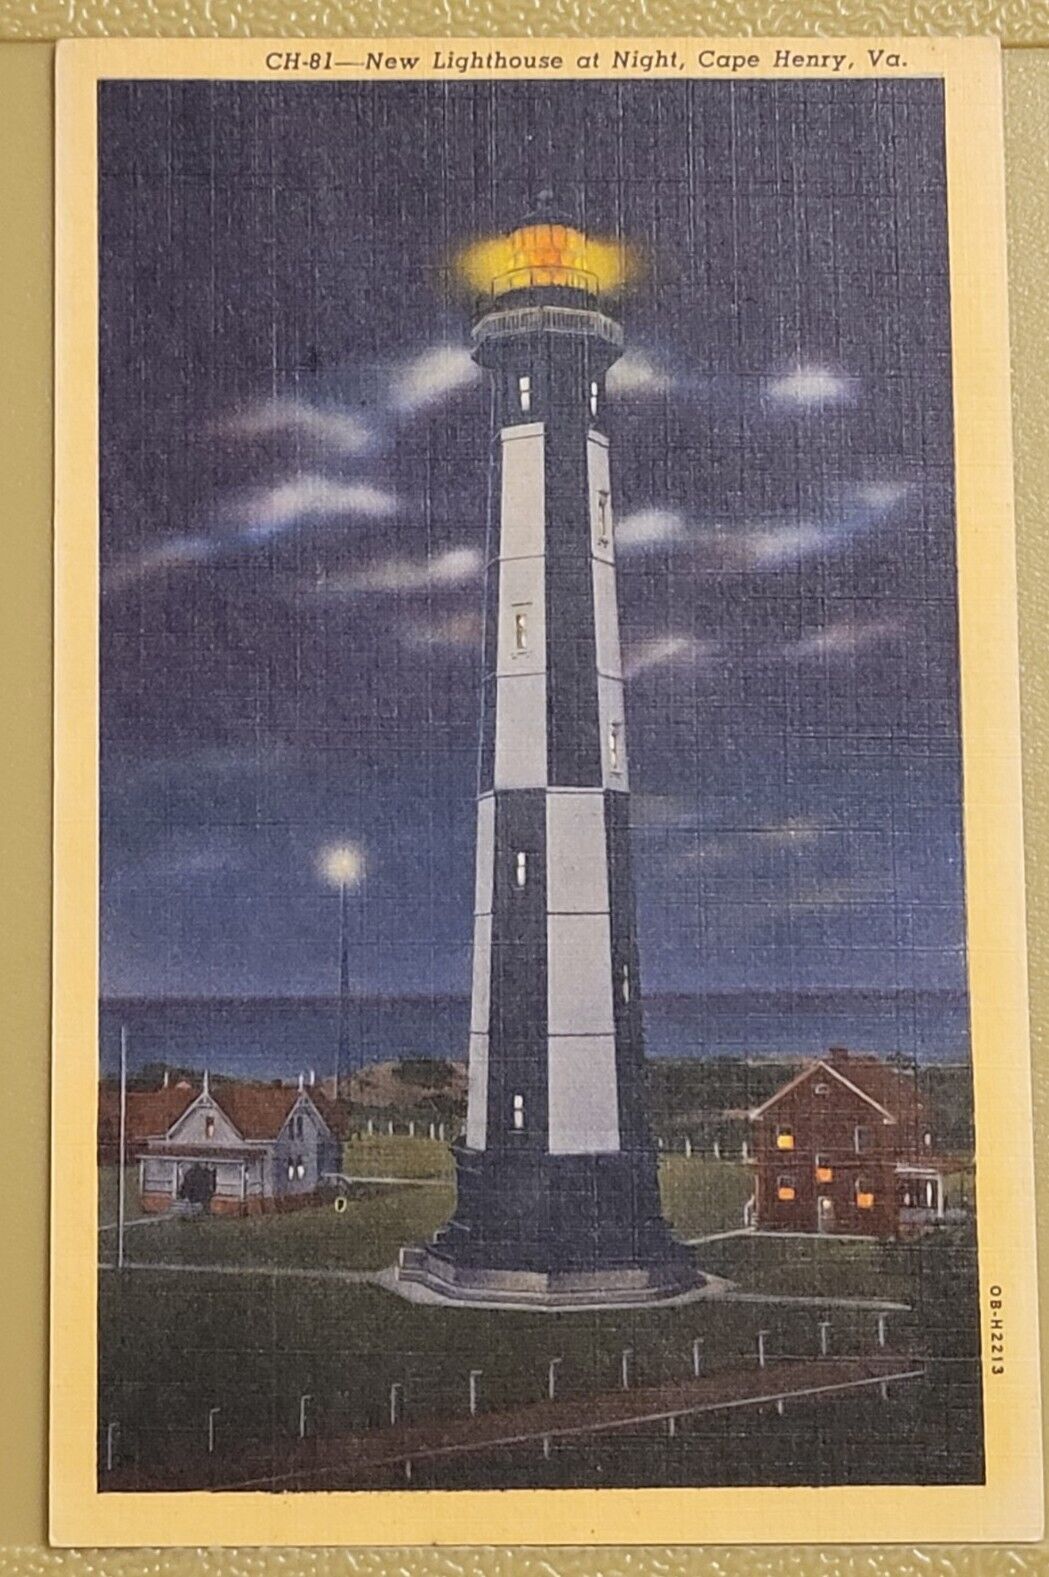 Lighthouse at Cape Henry Virginia at Night - Vintage Linen Postcard - 1941